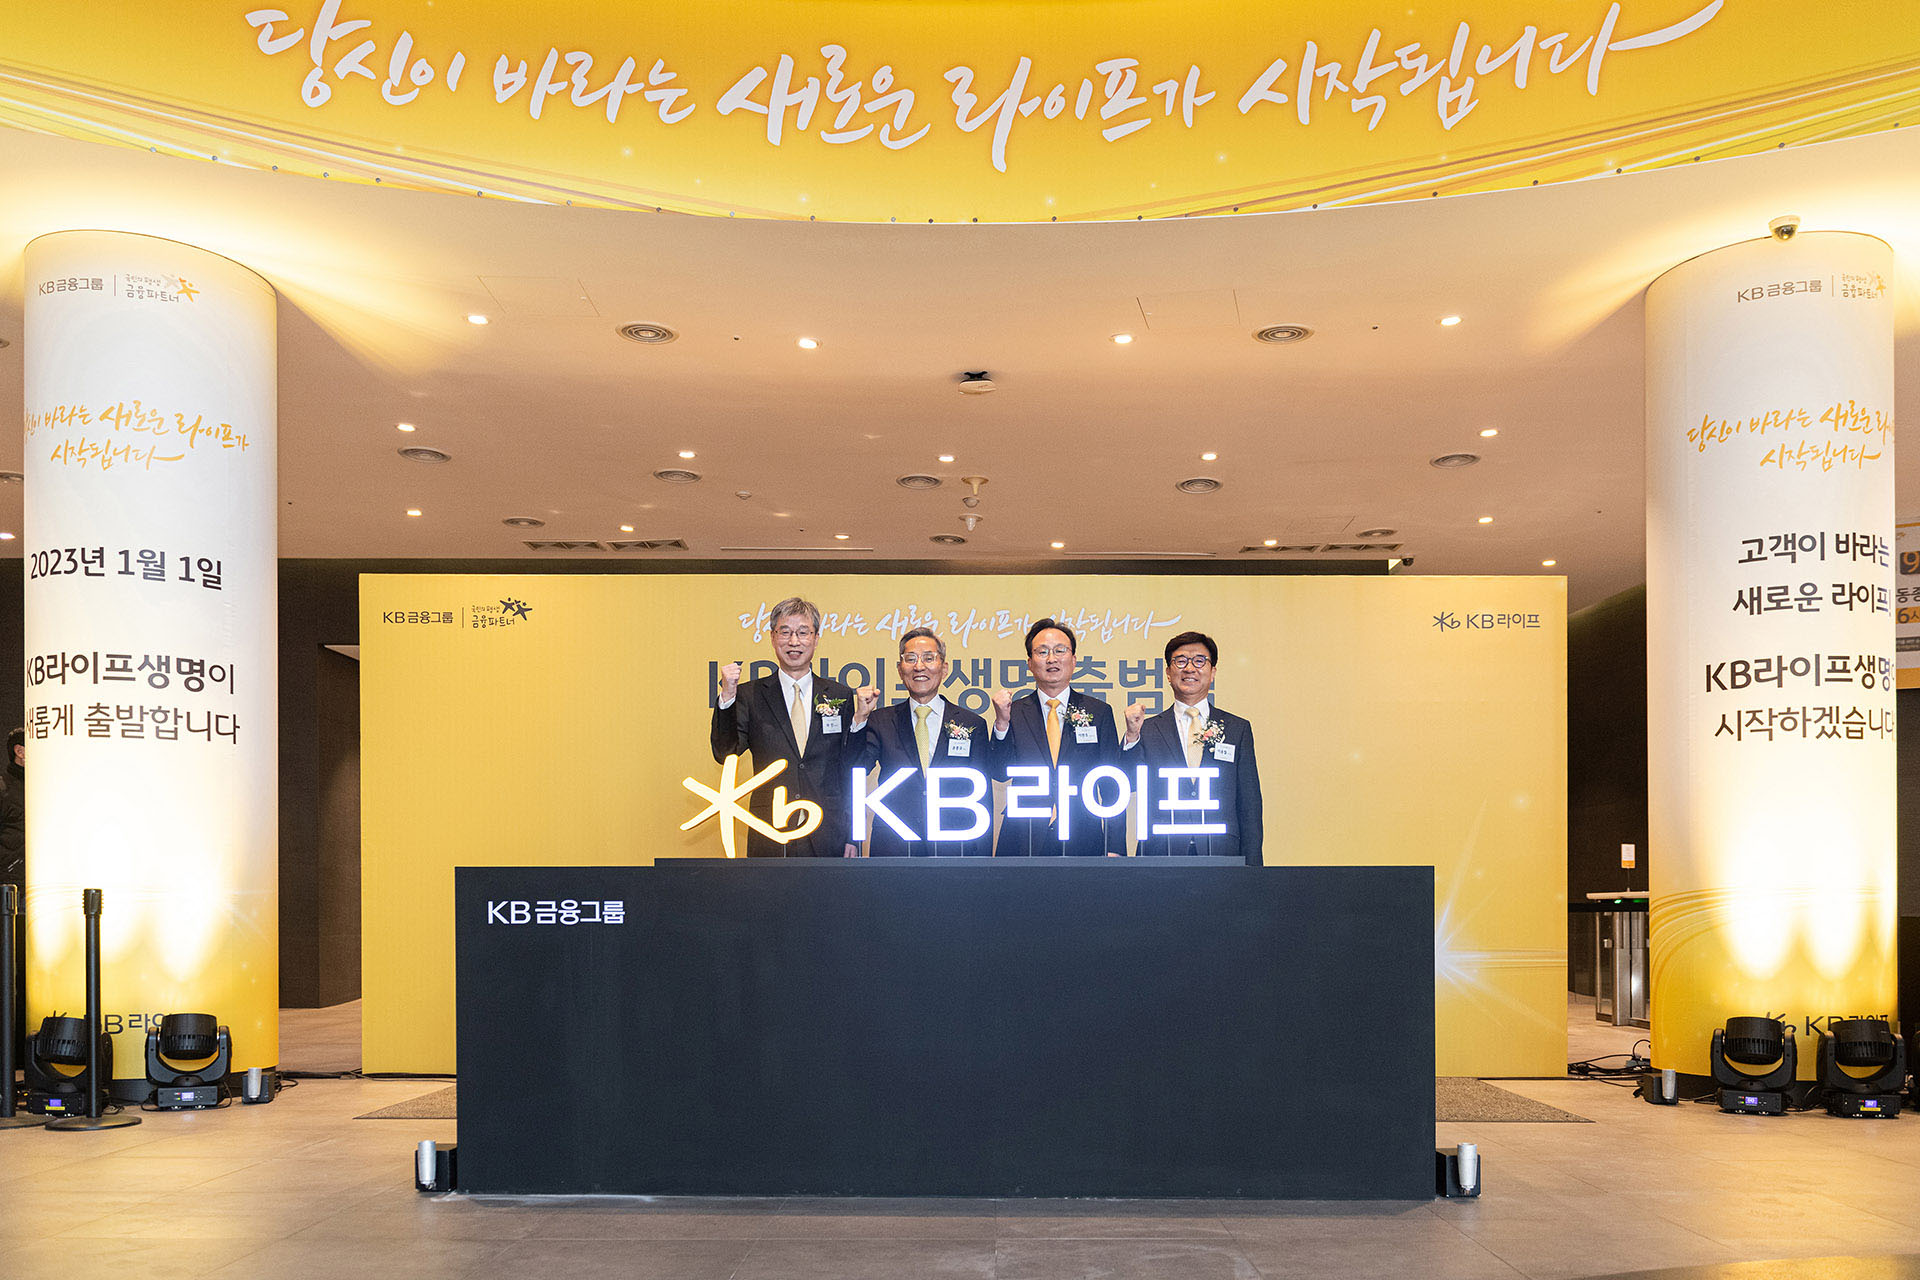 The image of the launch of KB Life Insurance Corporation